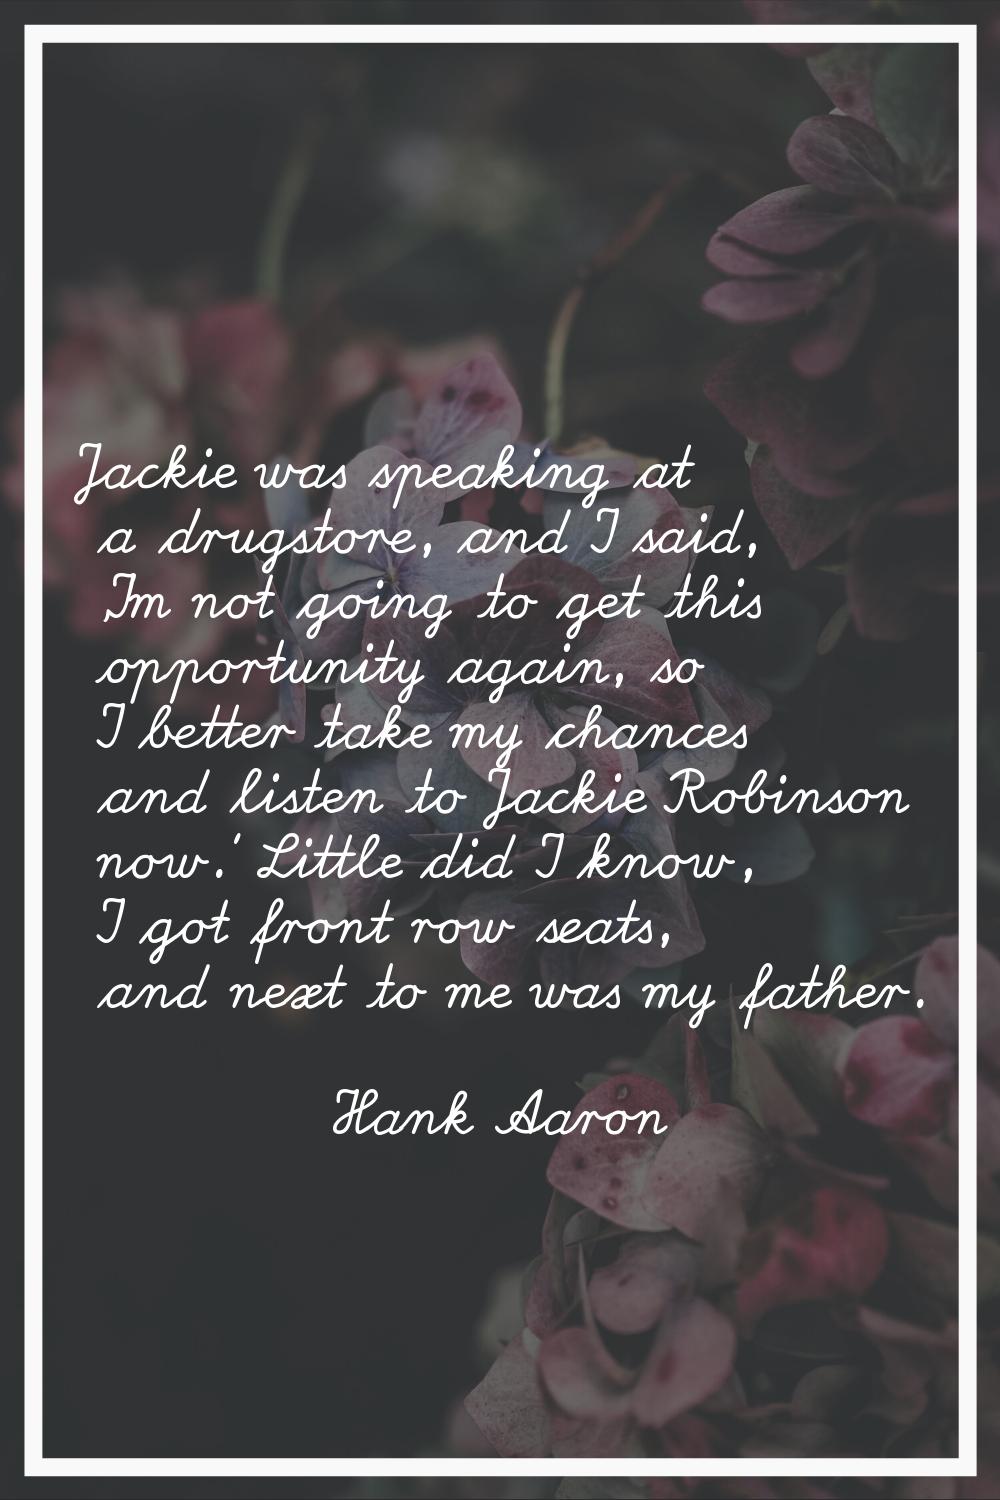 Jackie was speaking at a drugstore, and I said, 'I'm not going to get this opportunity again, so I 